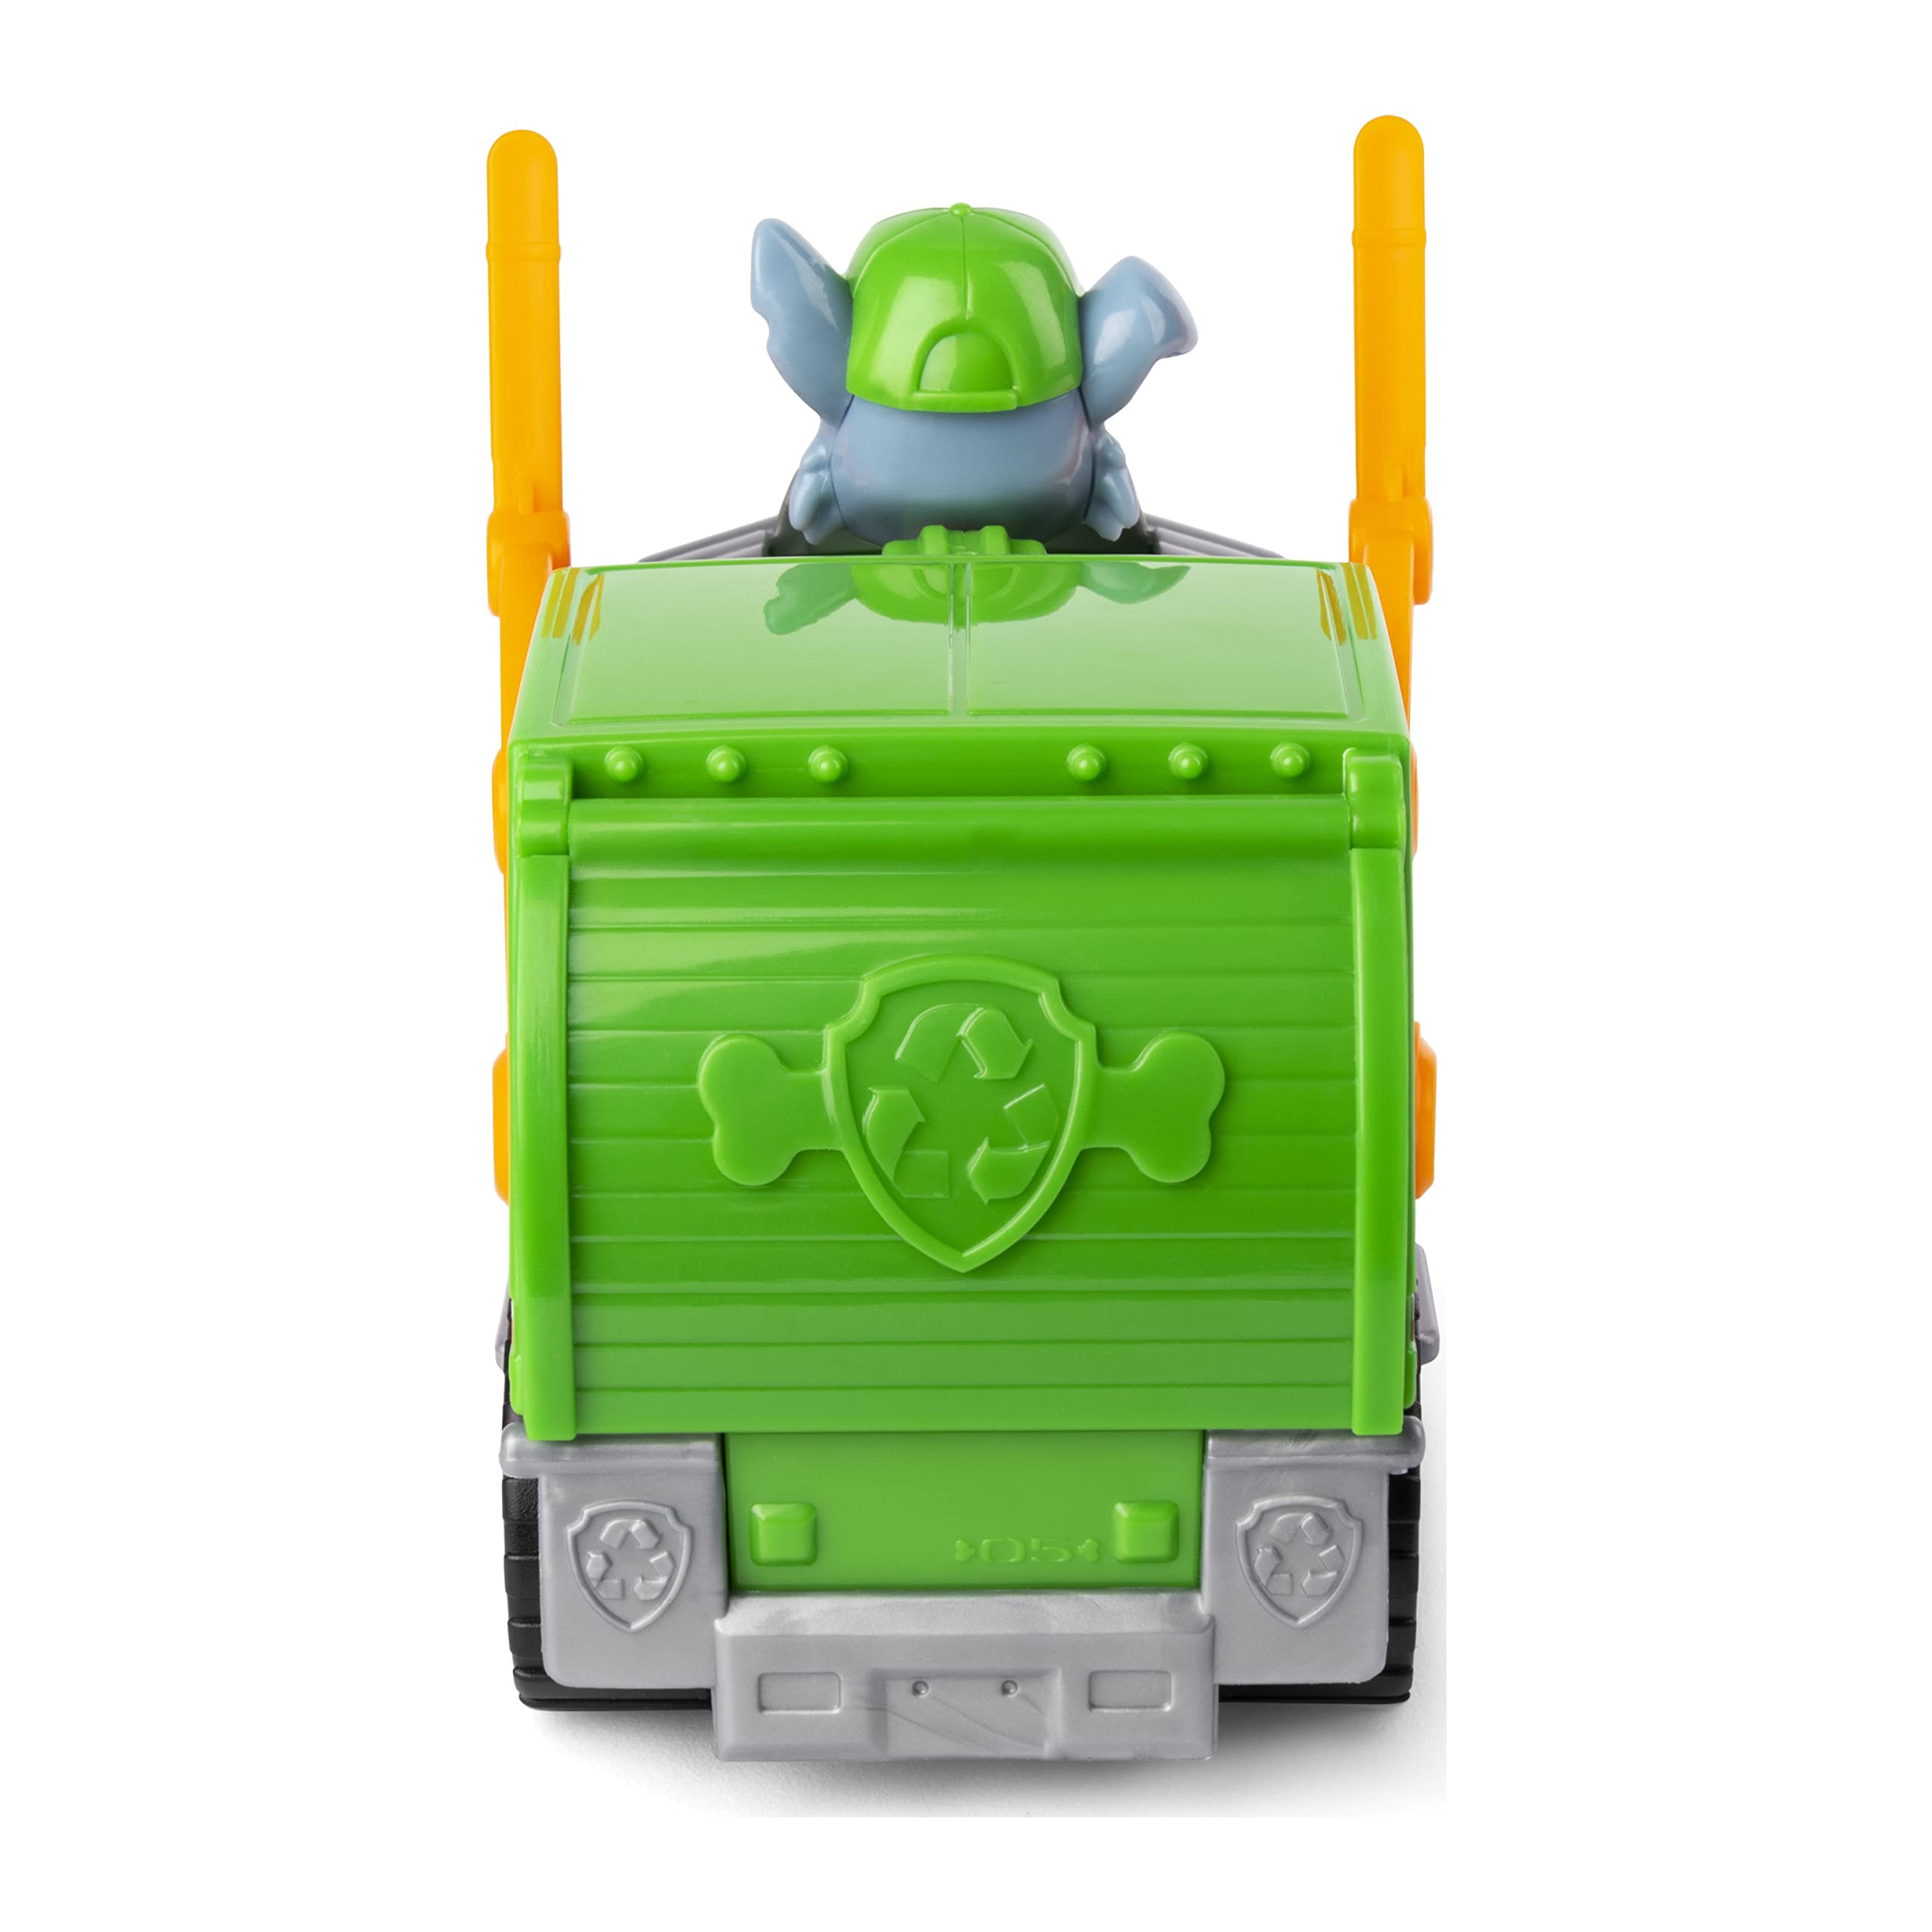 Paw Patrol, Rocky’s Recycle Truck Vehicle with Collectible Figure, for Kids Aged 3 and Up